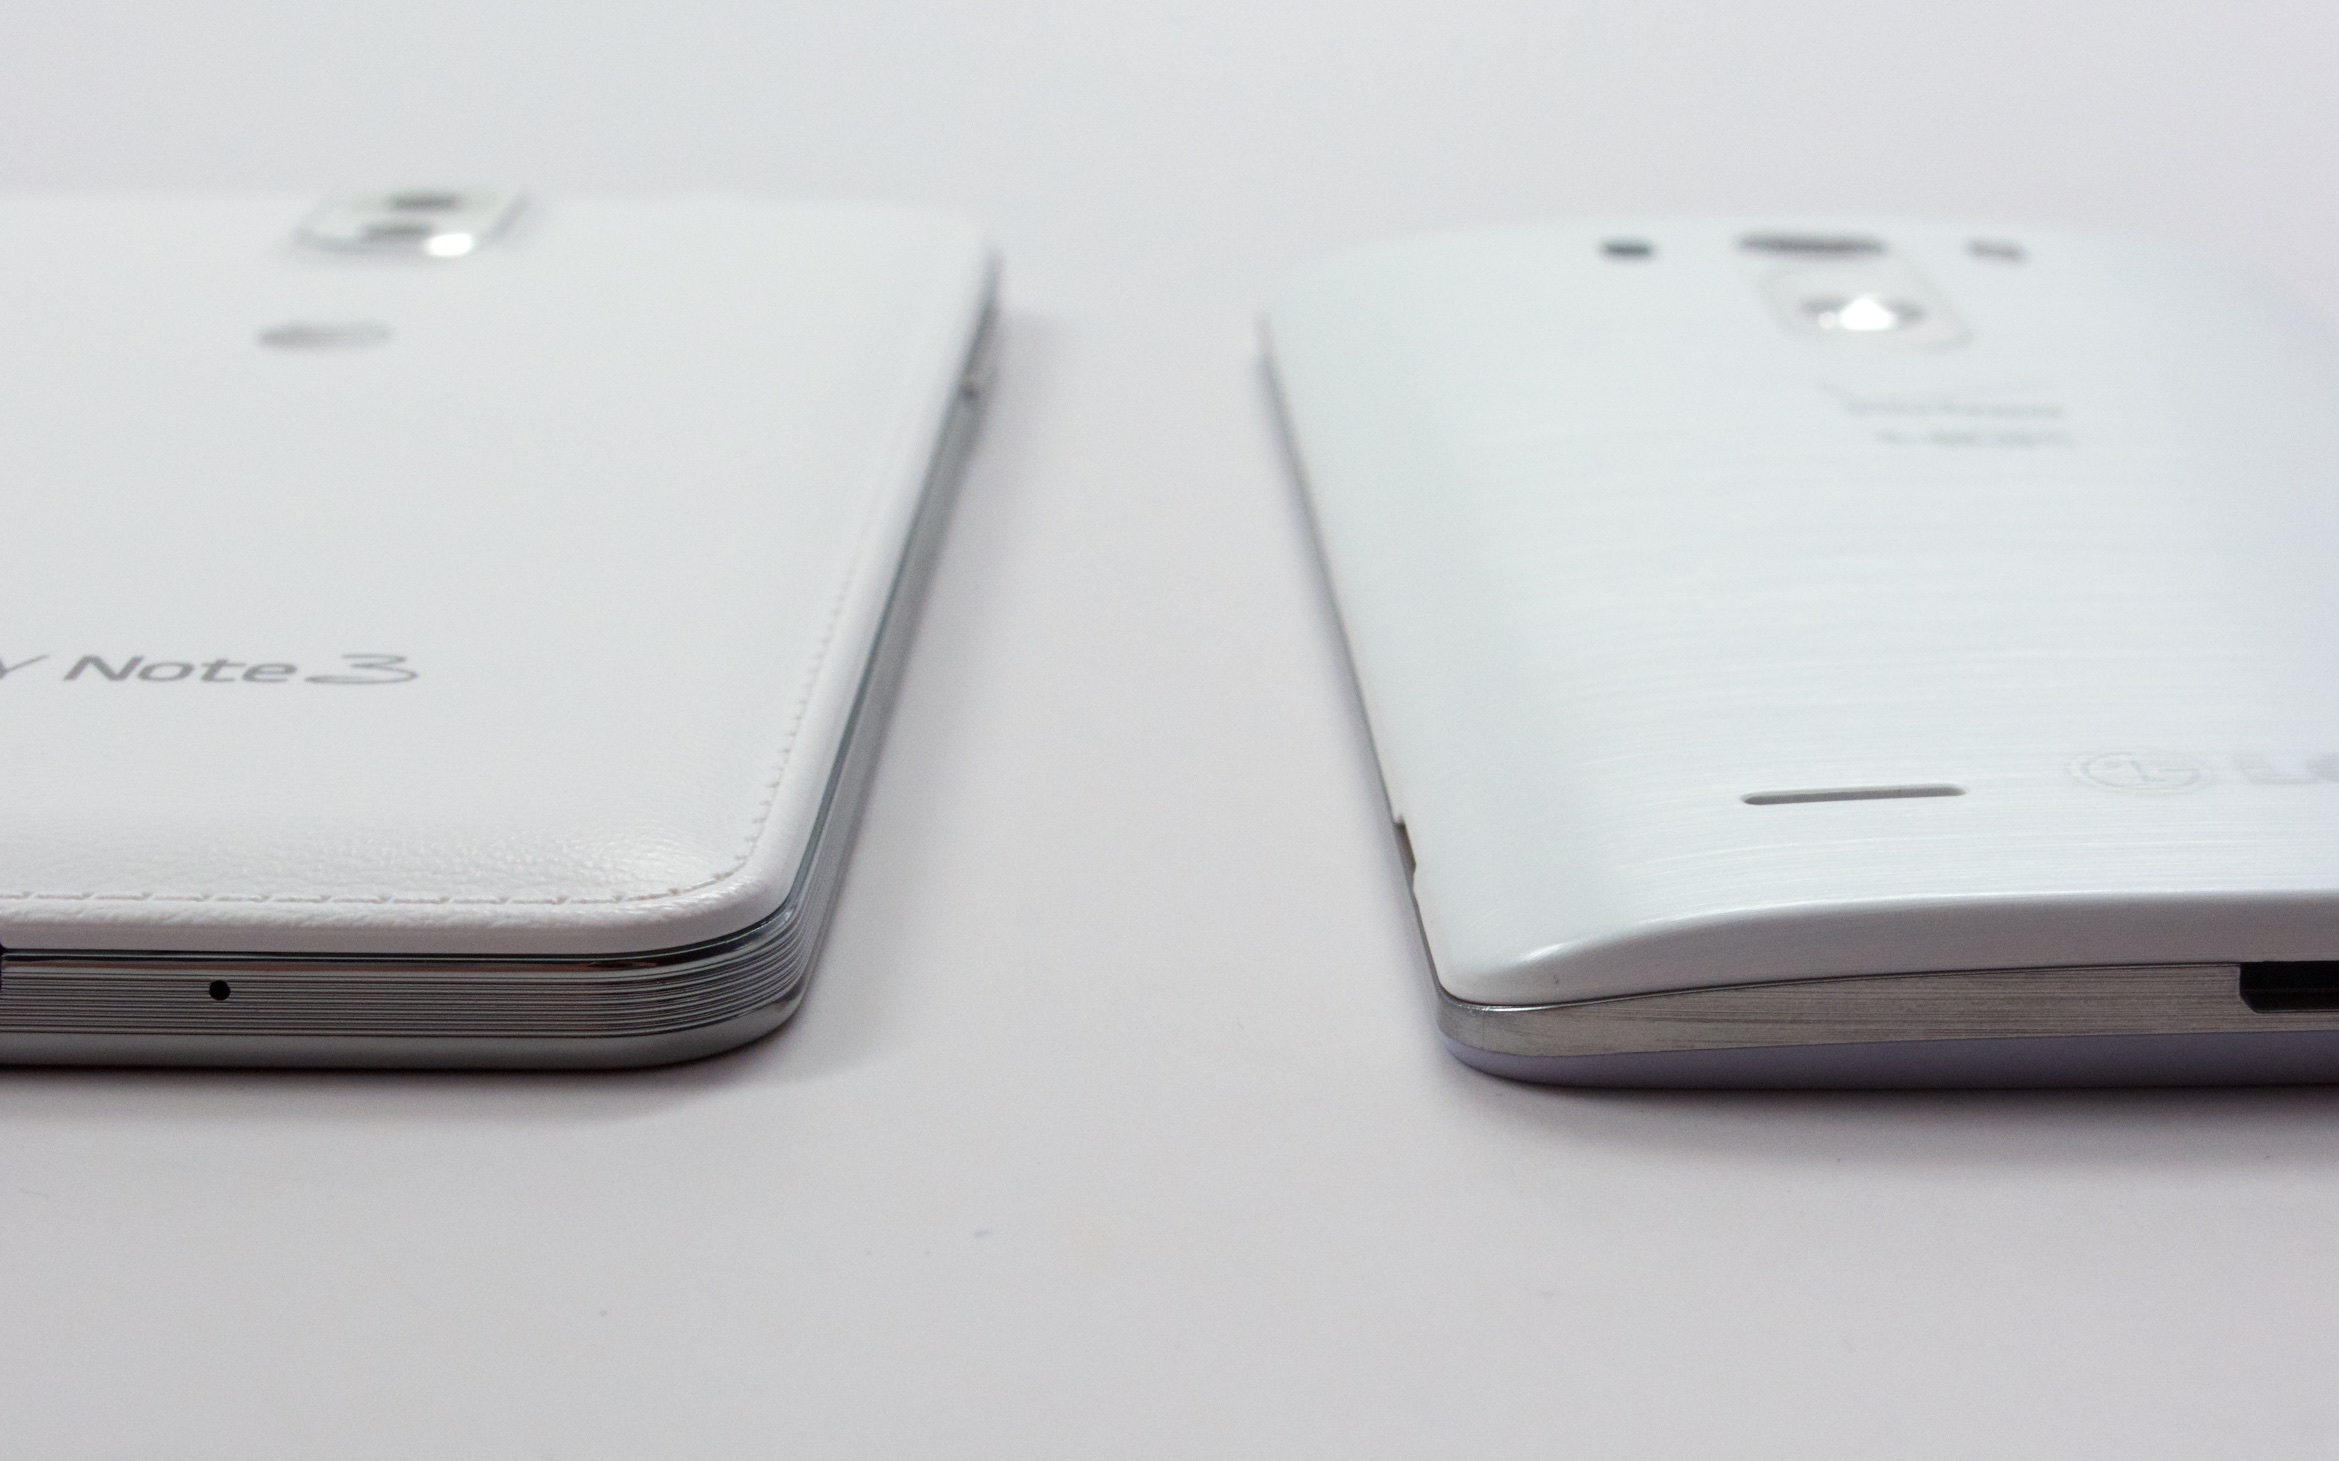 A curved back and sloped edges make the LG G3 easier to hold with one hand.